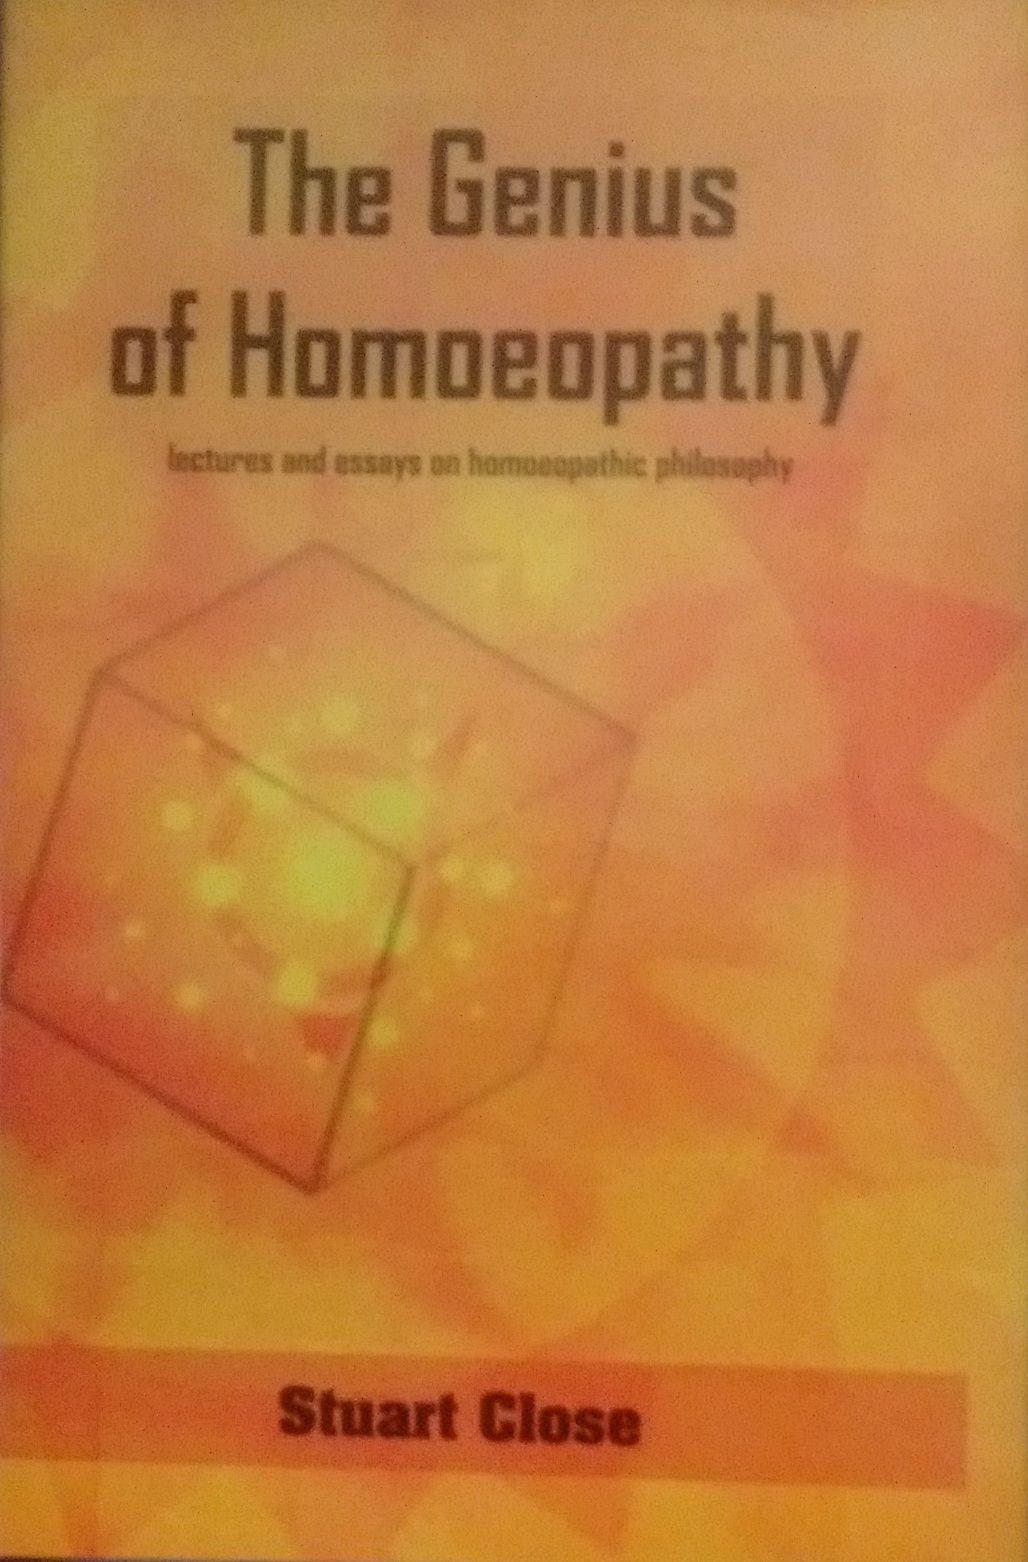 The Genius Of Homoeopathy: Lectures And Essays On Homoeopathic Philosophy